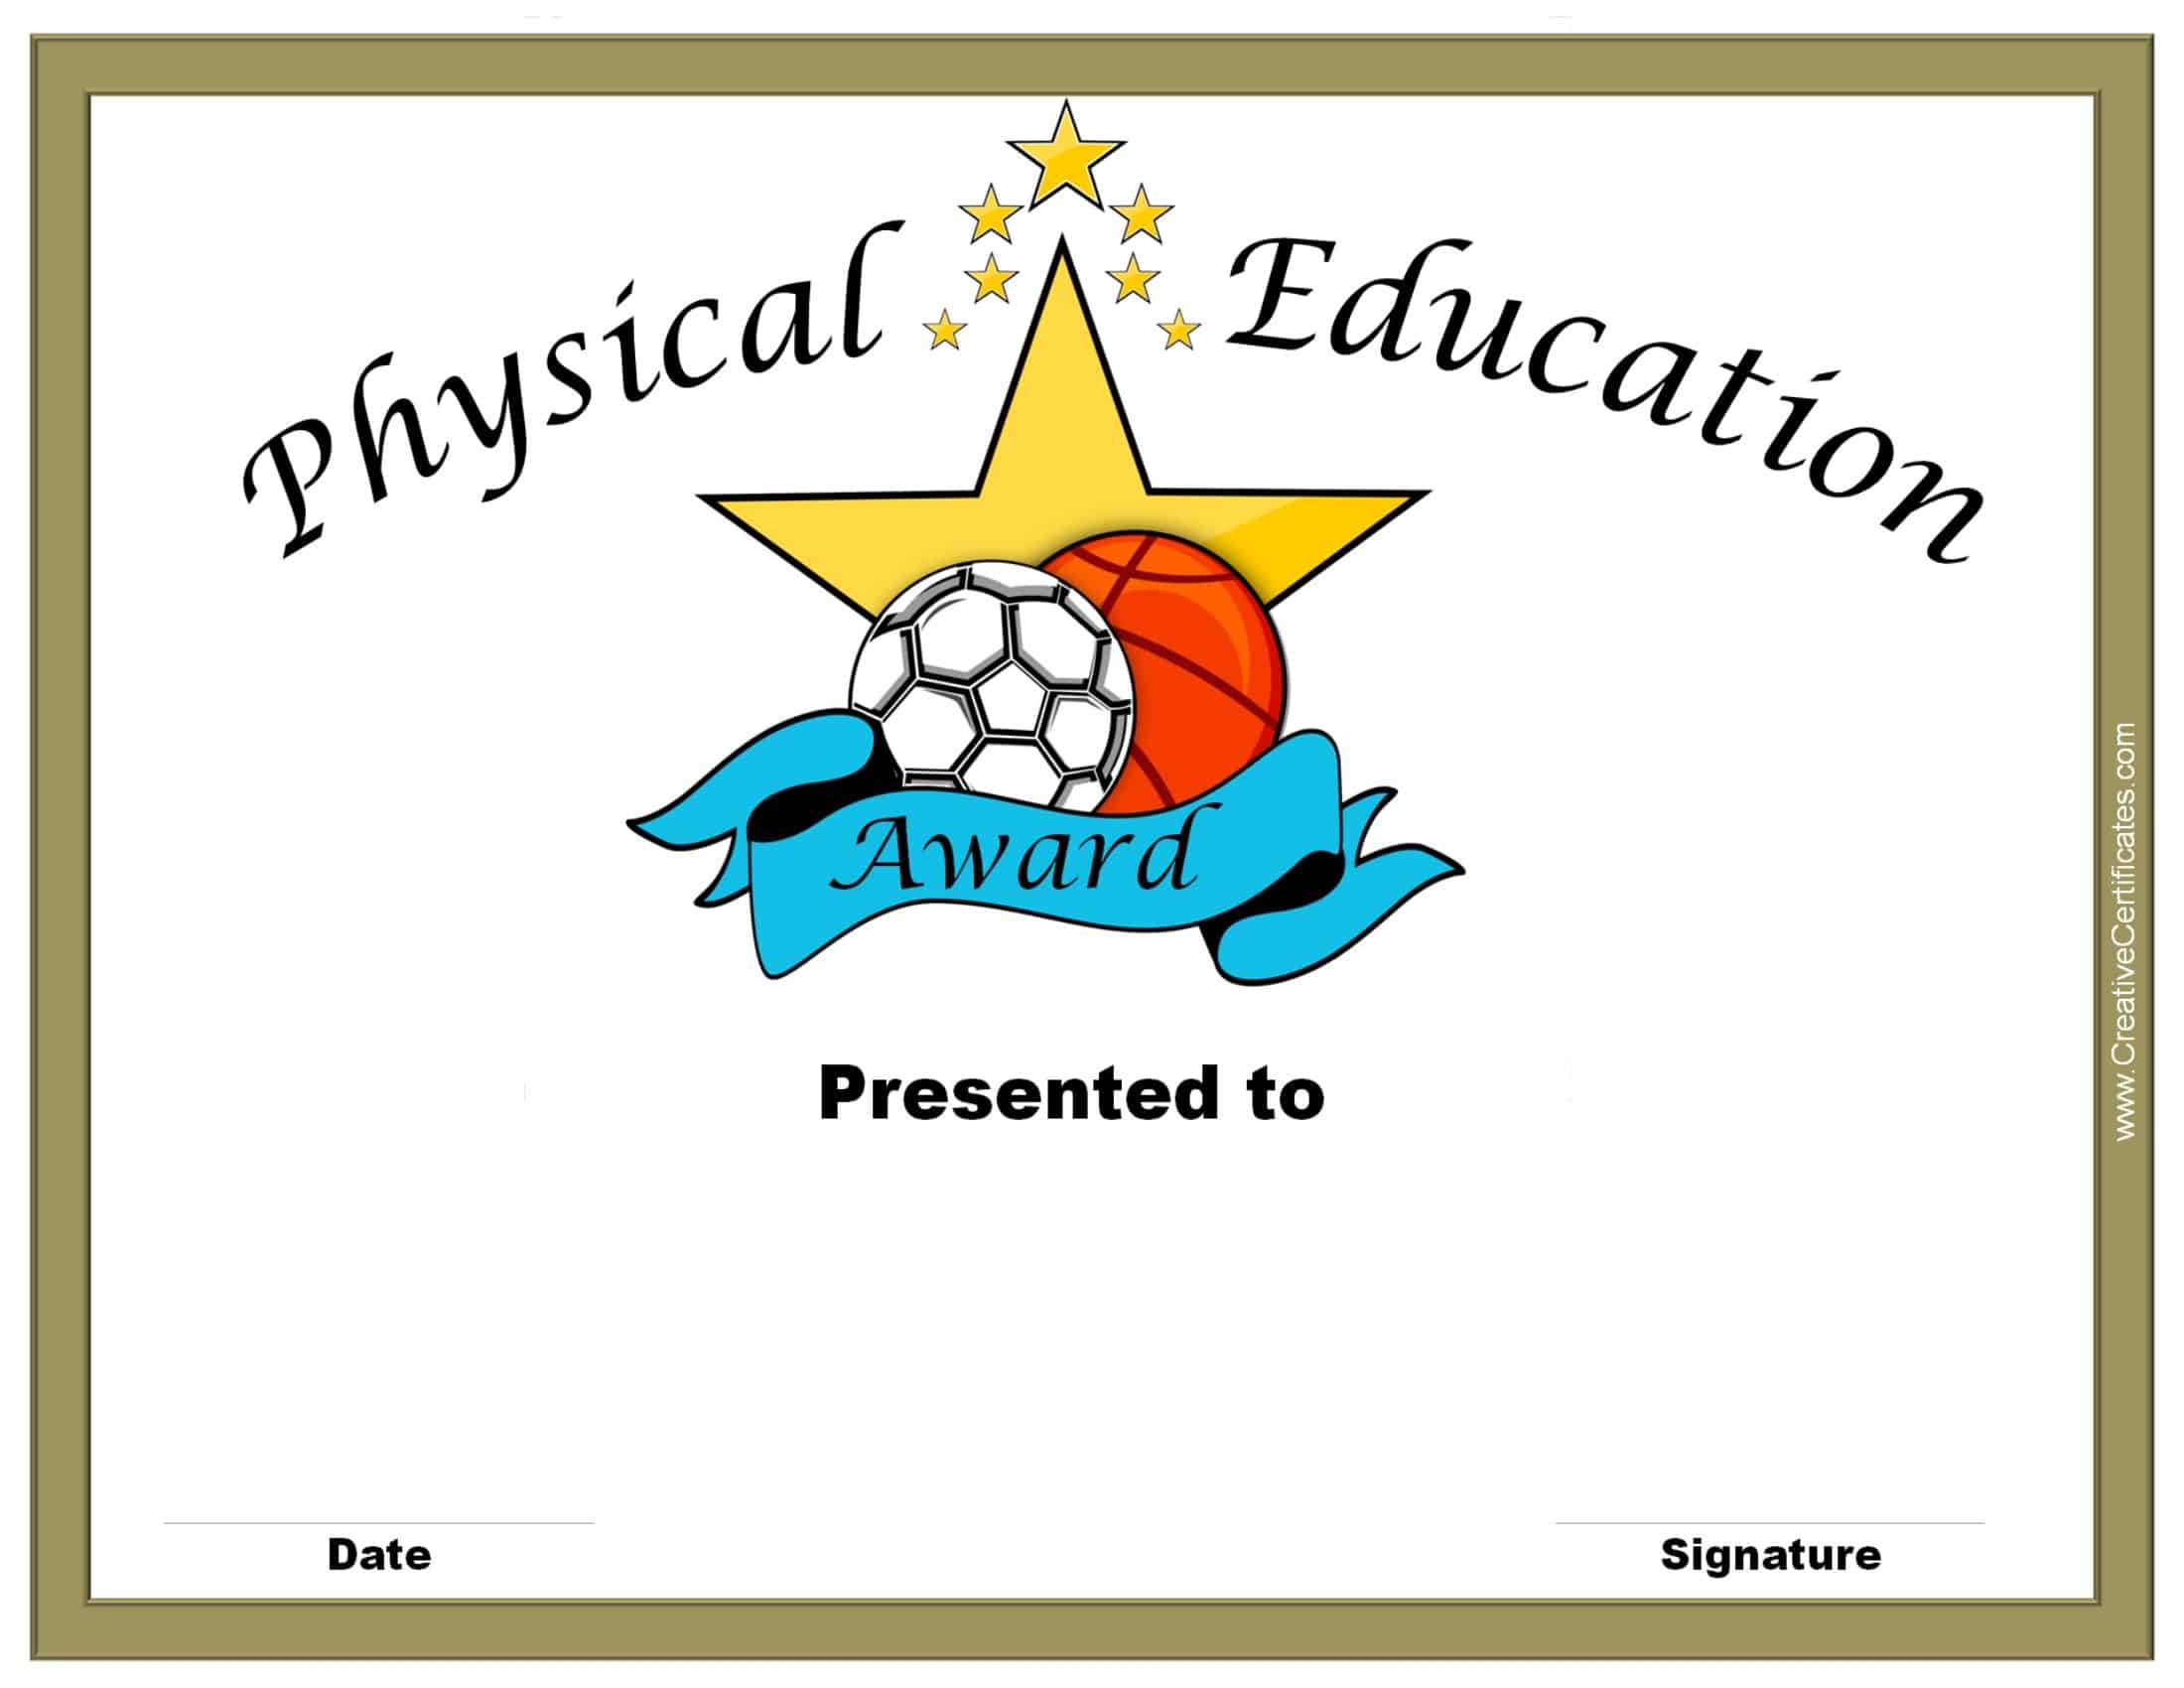 Physical Education Awards and Certificates Free